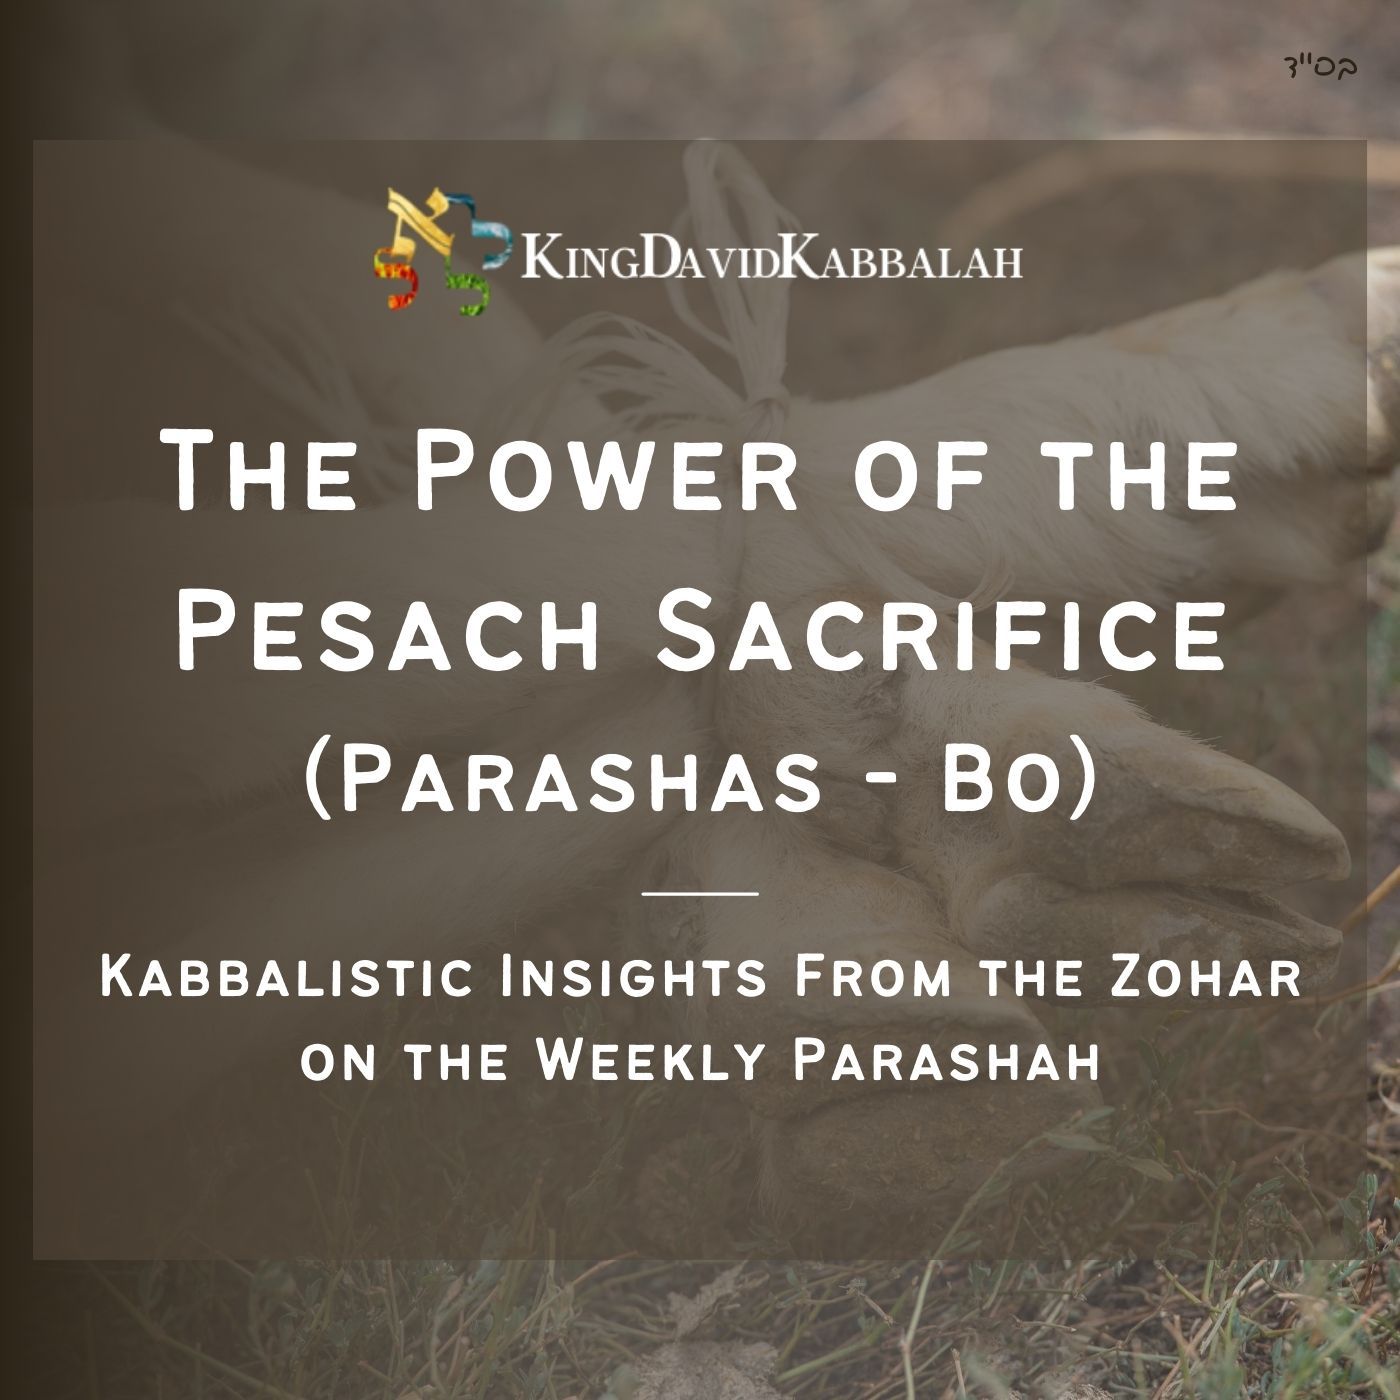 The Power of the Pesach Sacrifice - Kabbalistic Inspiration on the Parasha from the Zohar